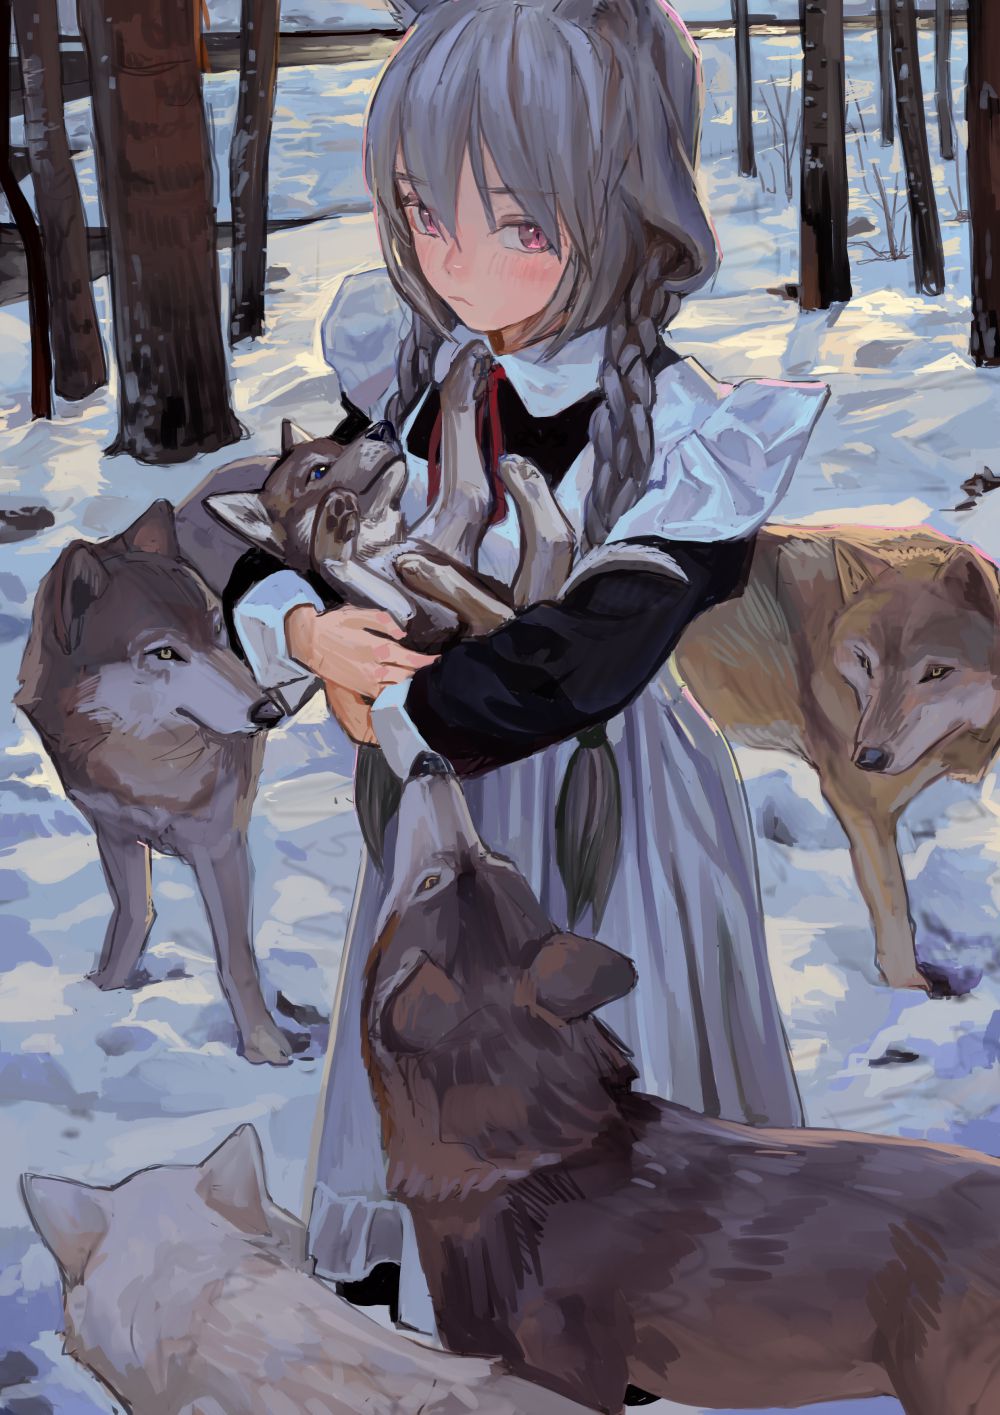 Anime Girls Maid Outfit Wolf Animal Ears FKEY Vertical Maid Braided Hair Animals Snow Looking At Vie 1000x1415